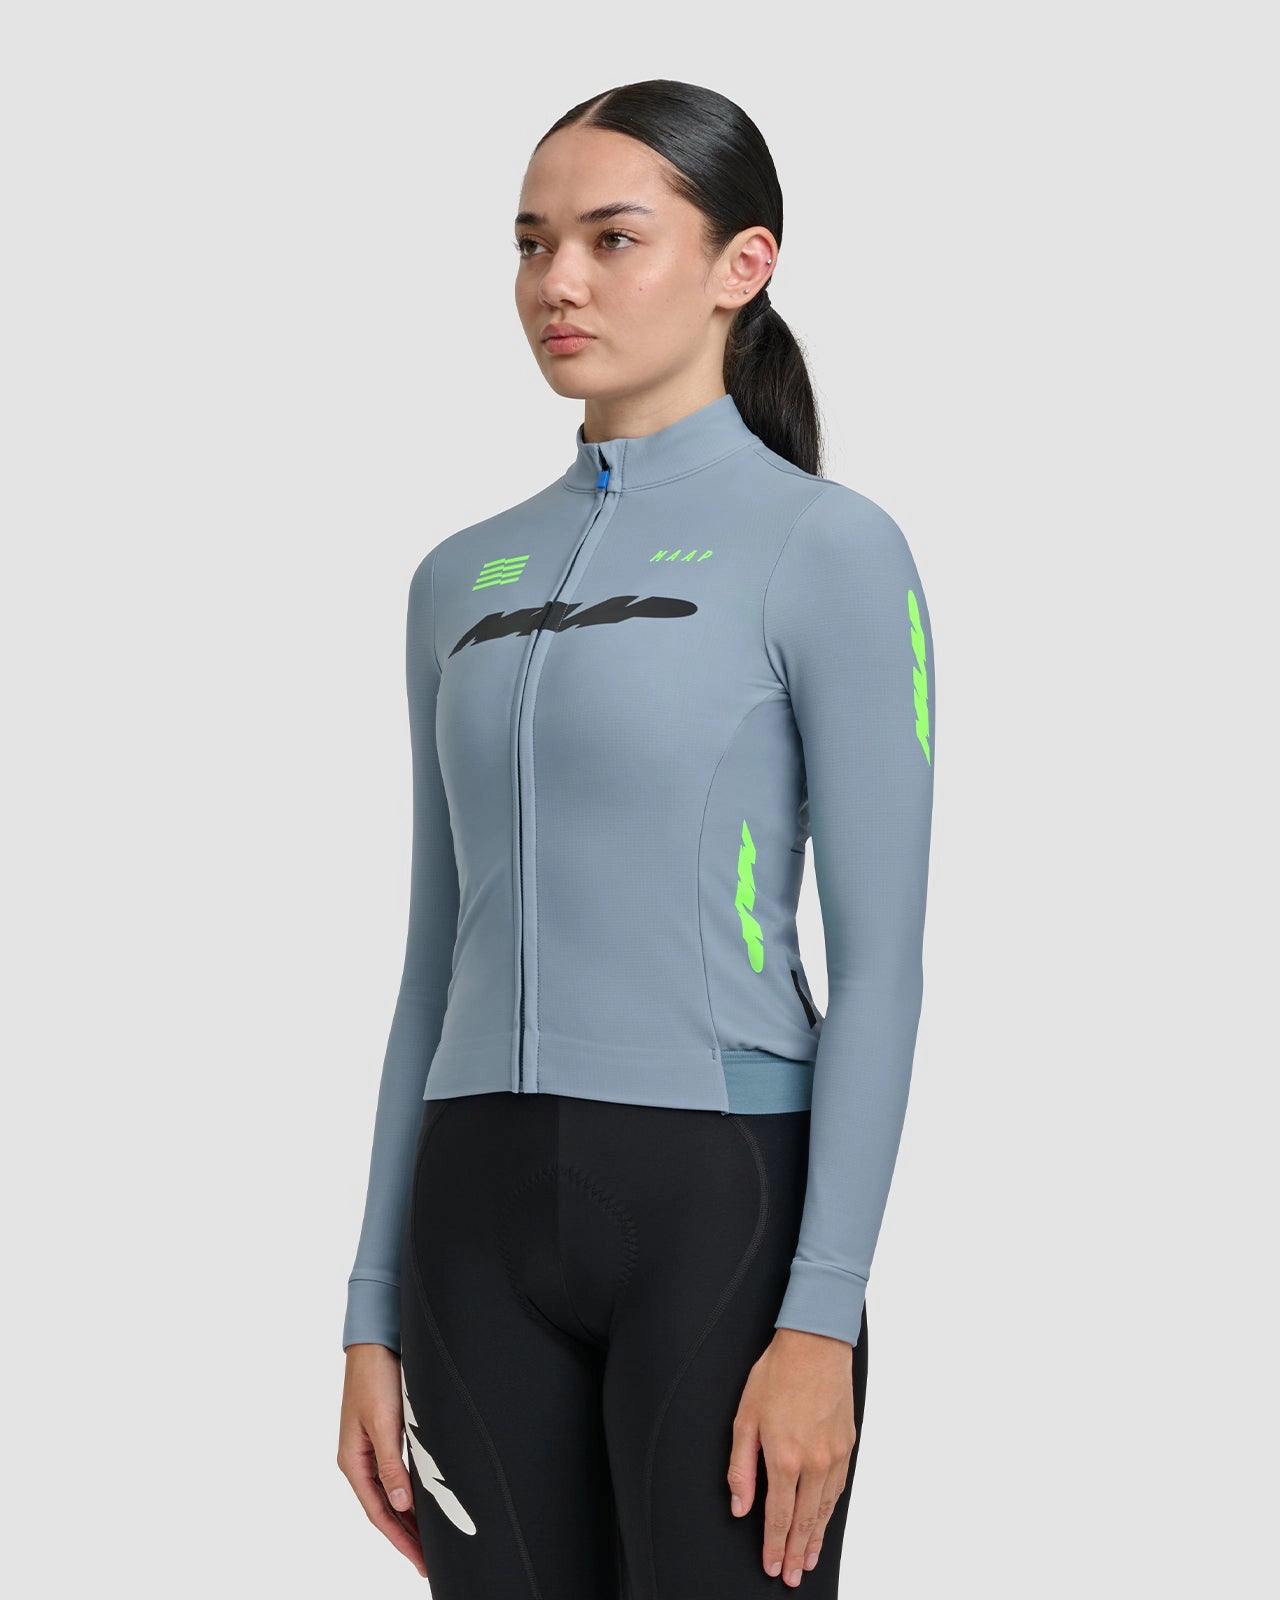 MAAP Women's Eclipse Thermal LS Jersey 2.0 Teal レディース長袖サイクルジャージ  | CYCLISM